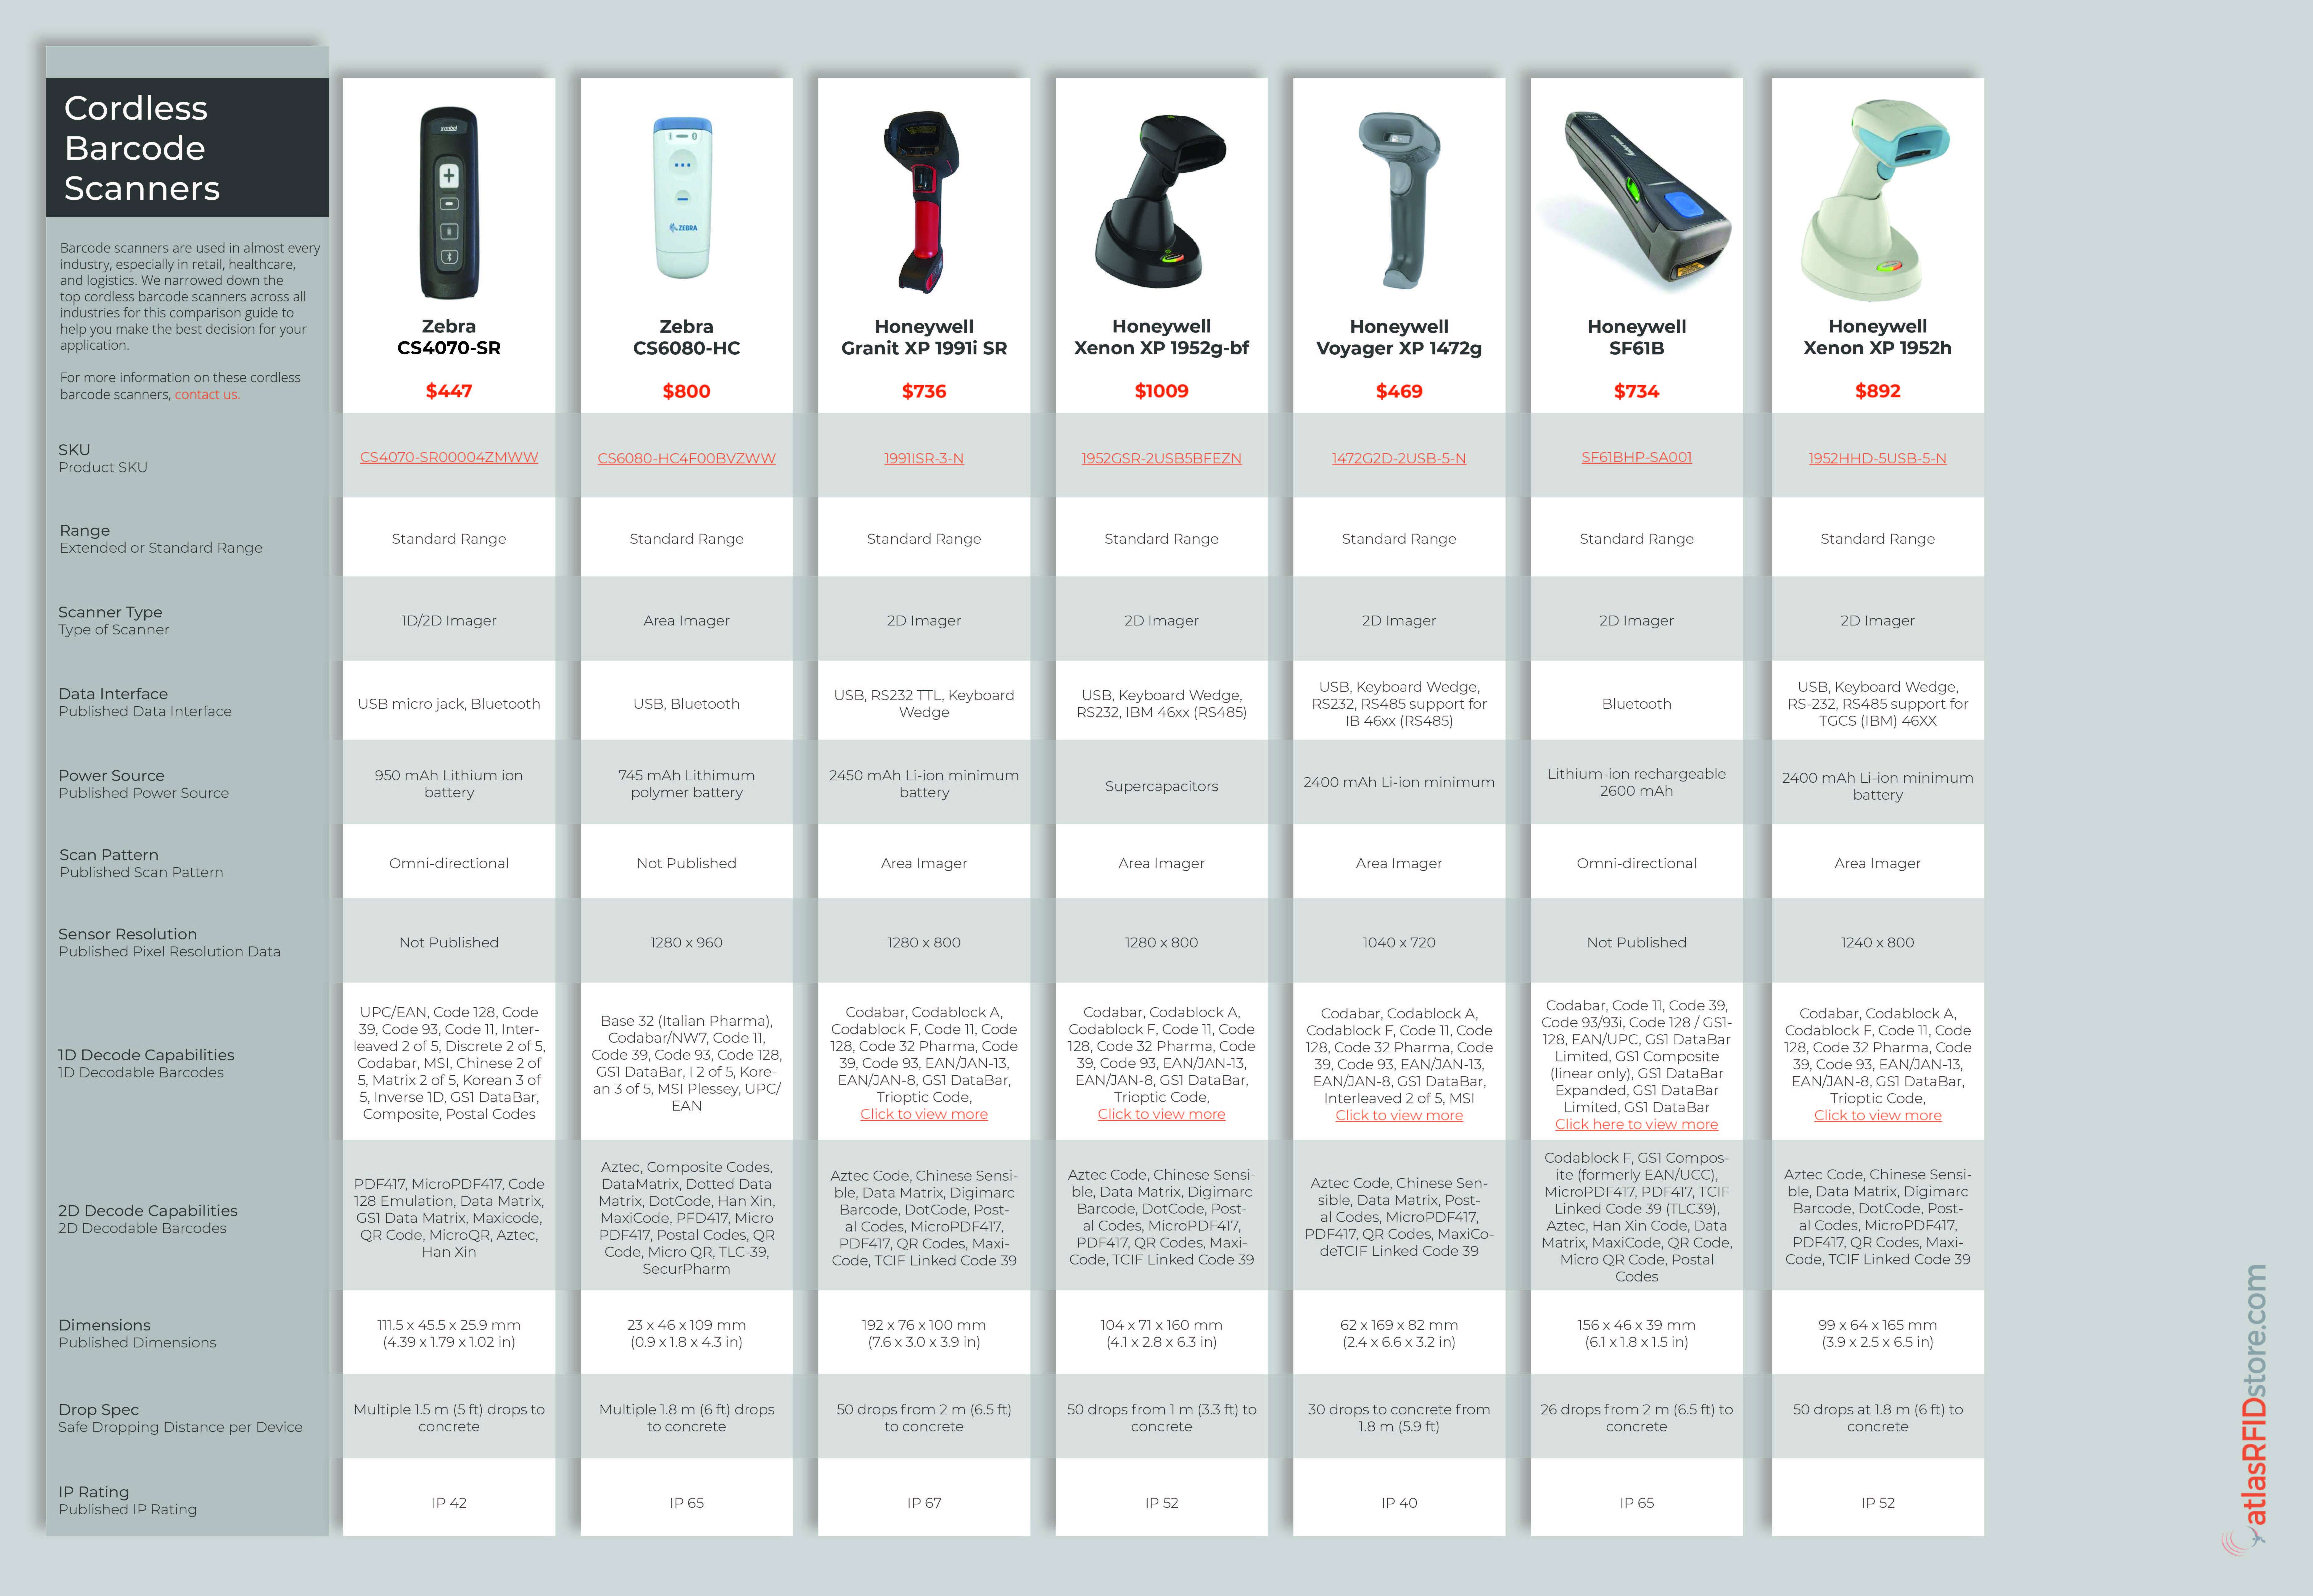 Cordless Barcode Scanner Comparison Guide